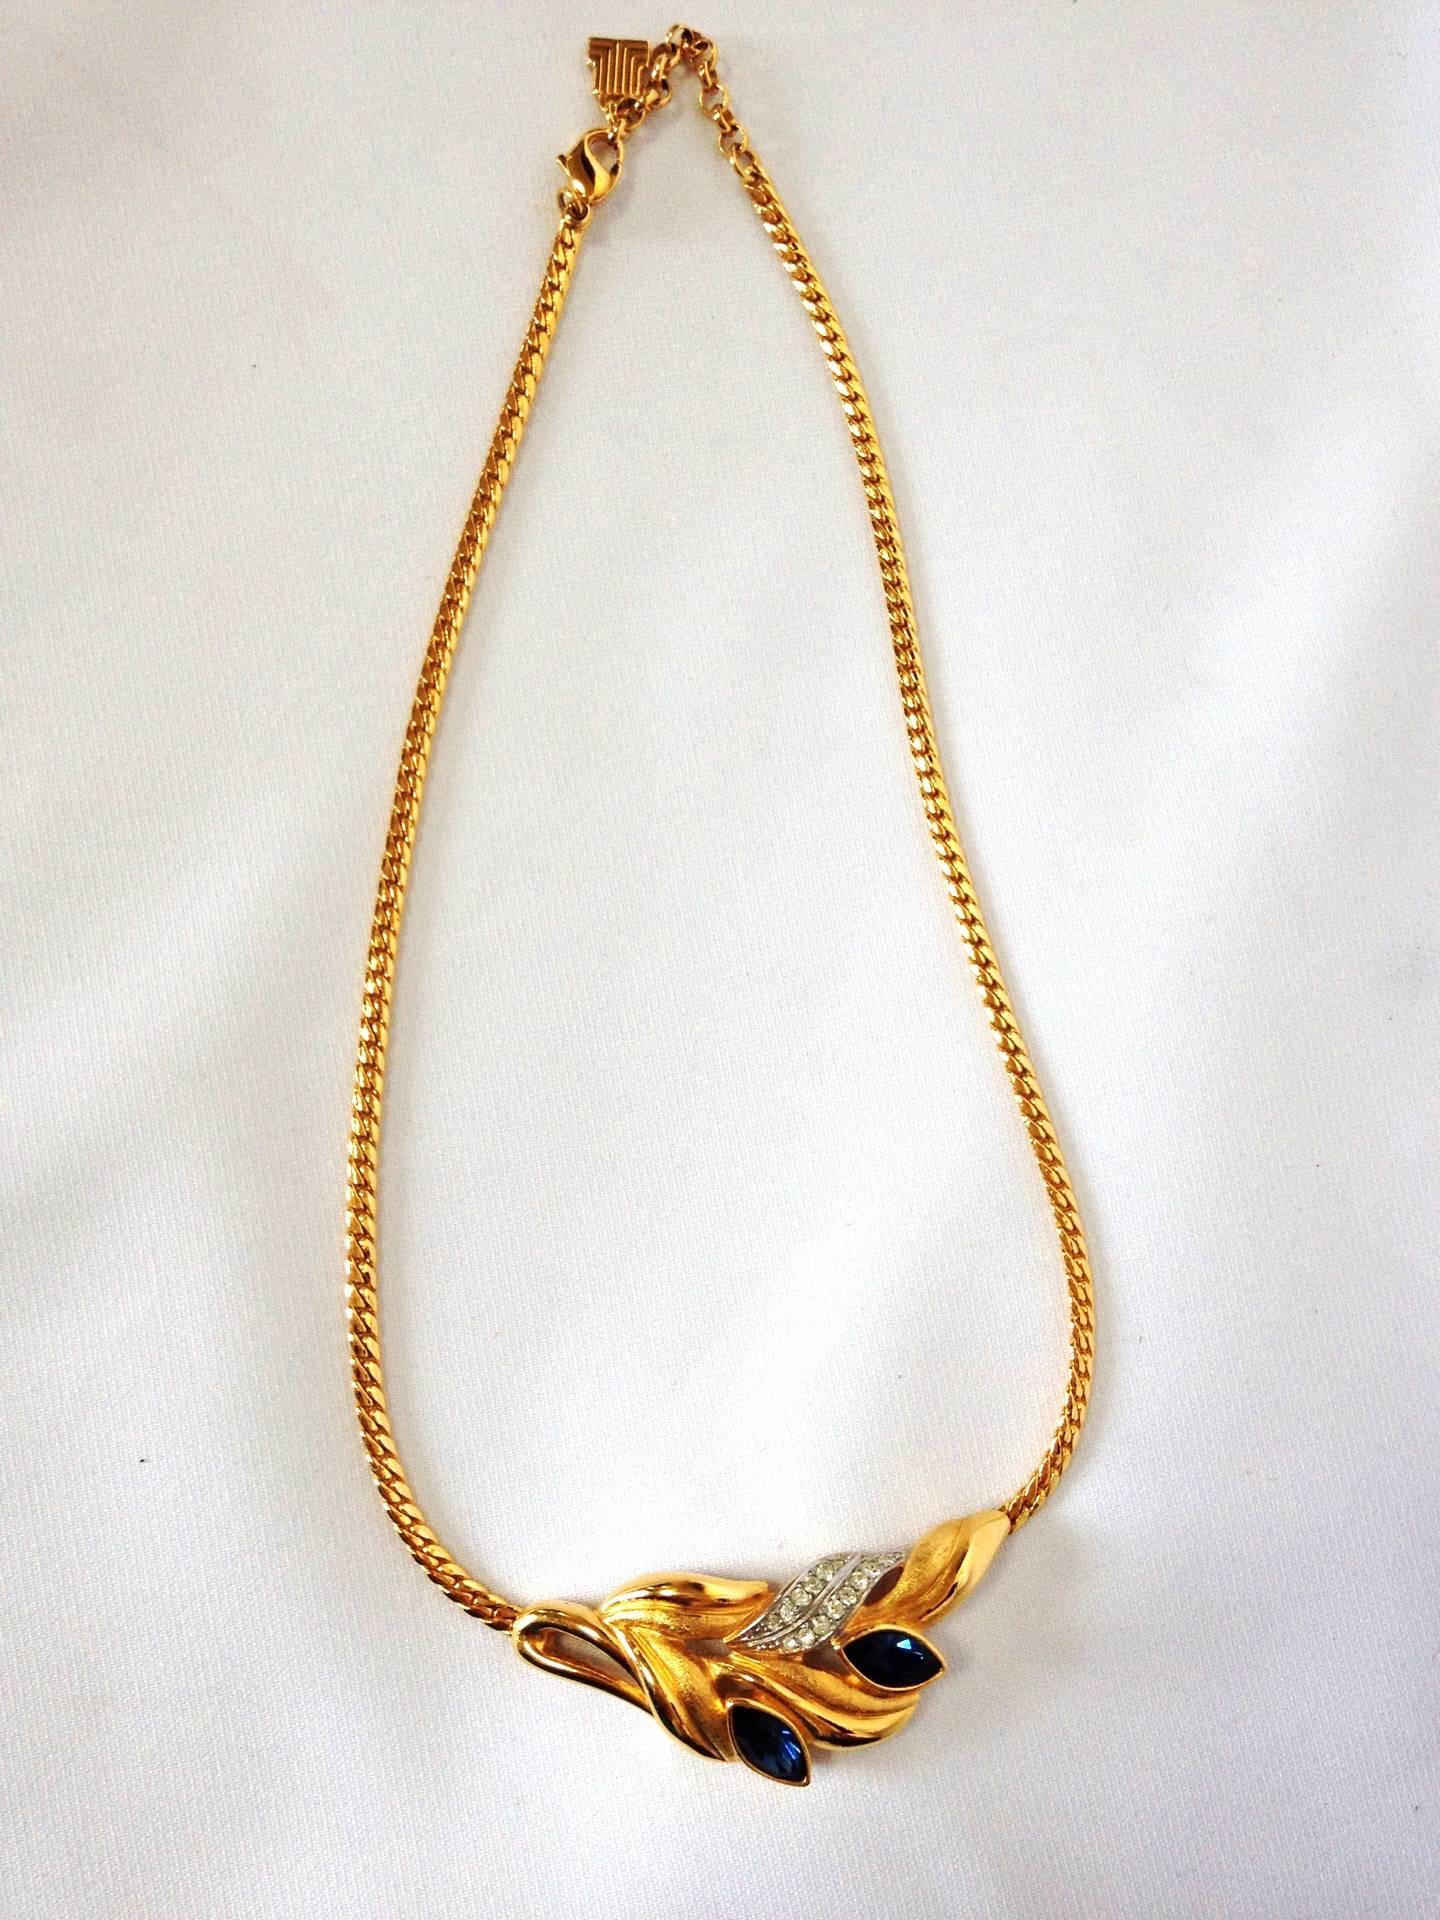 Vintage LANVIN golden chain skinny necklace with golden leaf motif pendant top with clear and navy crystal stones. Perfect jewelry gift.

This is a MINT, excellent vintage gold-tone chain necklace with leaf design pendant top from LANVIN back in